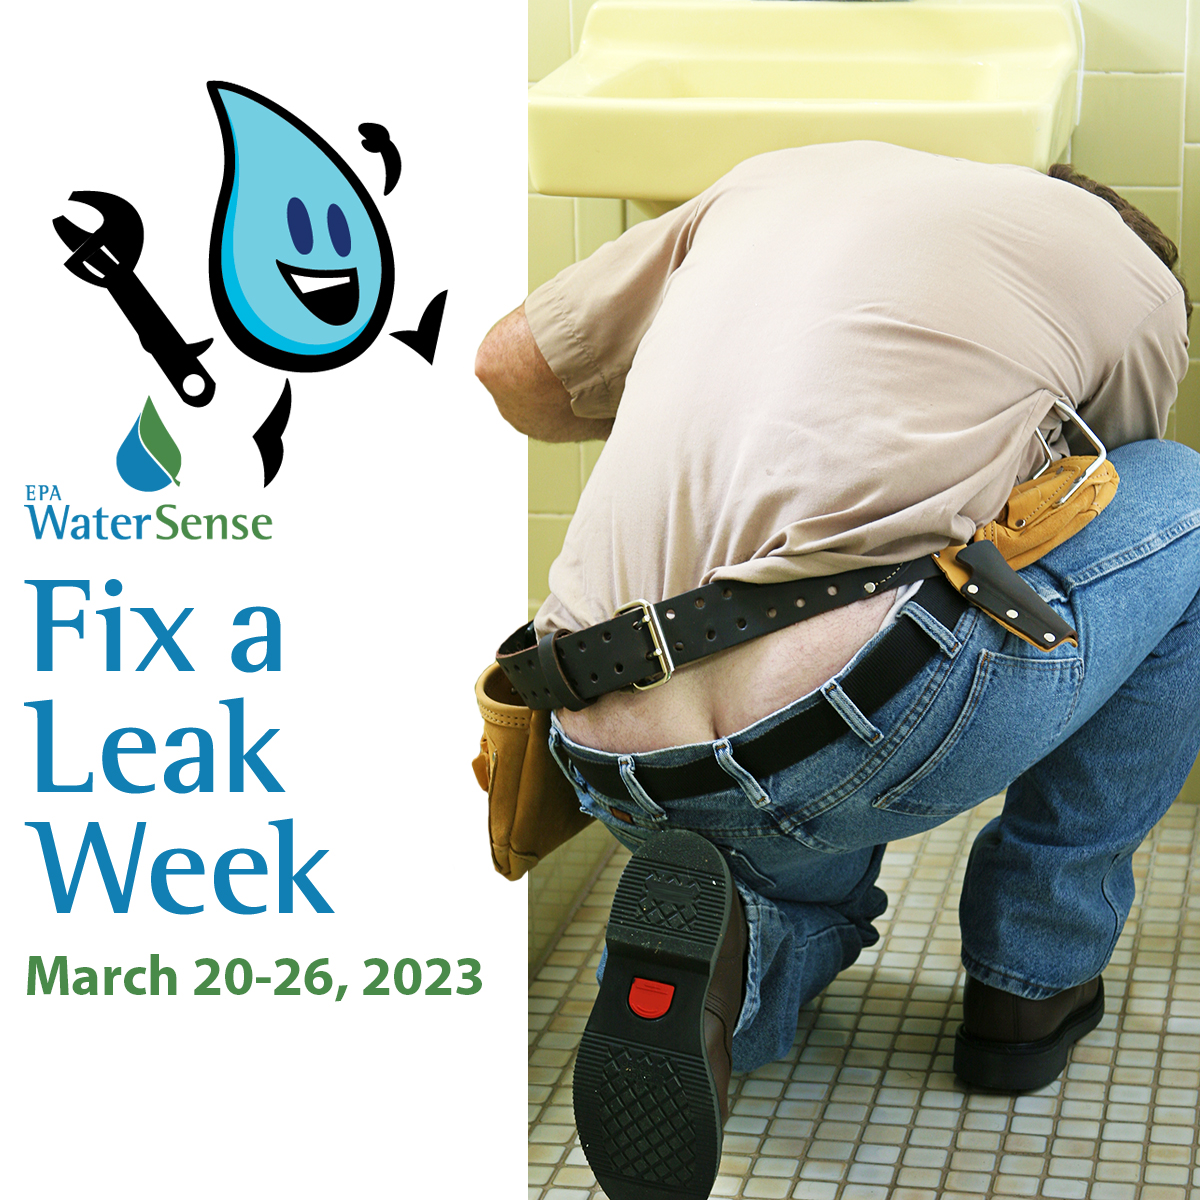 🛠️ A plumber’s job isn’t always what it’s cracked up to be. 🍑 Butt because household leaks can waste nearly 10,000 gallons of water each year, we all need a plan to fix the drip! 💧 Learn how to easily find and fix leaks in your home: bit.ly/3JioNJP. #FixALeakWeek